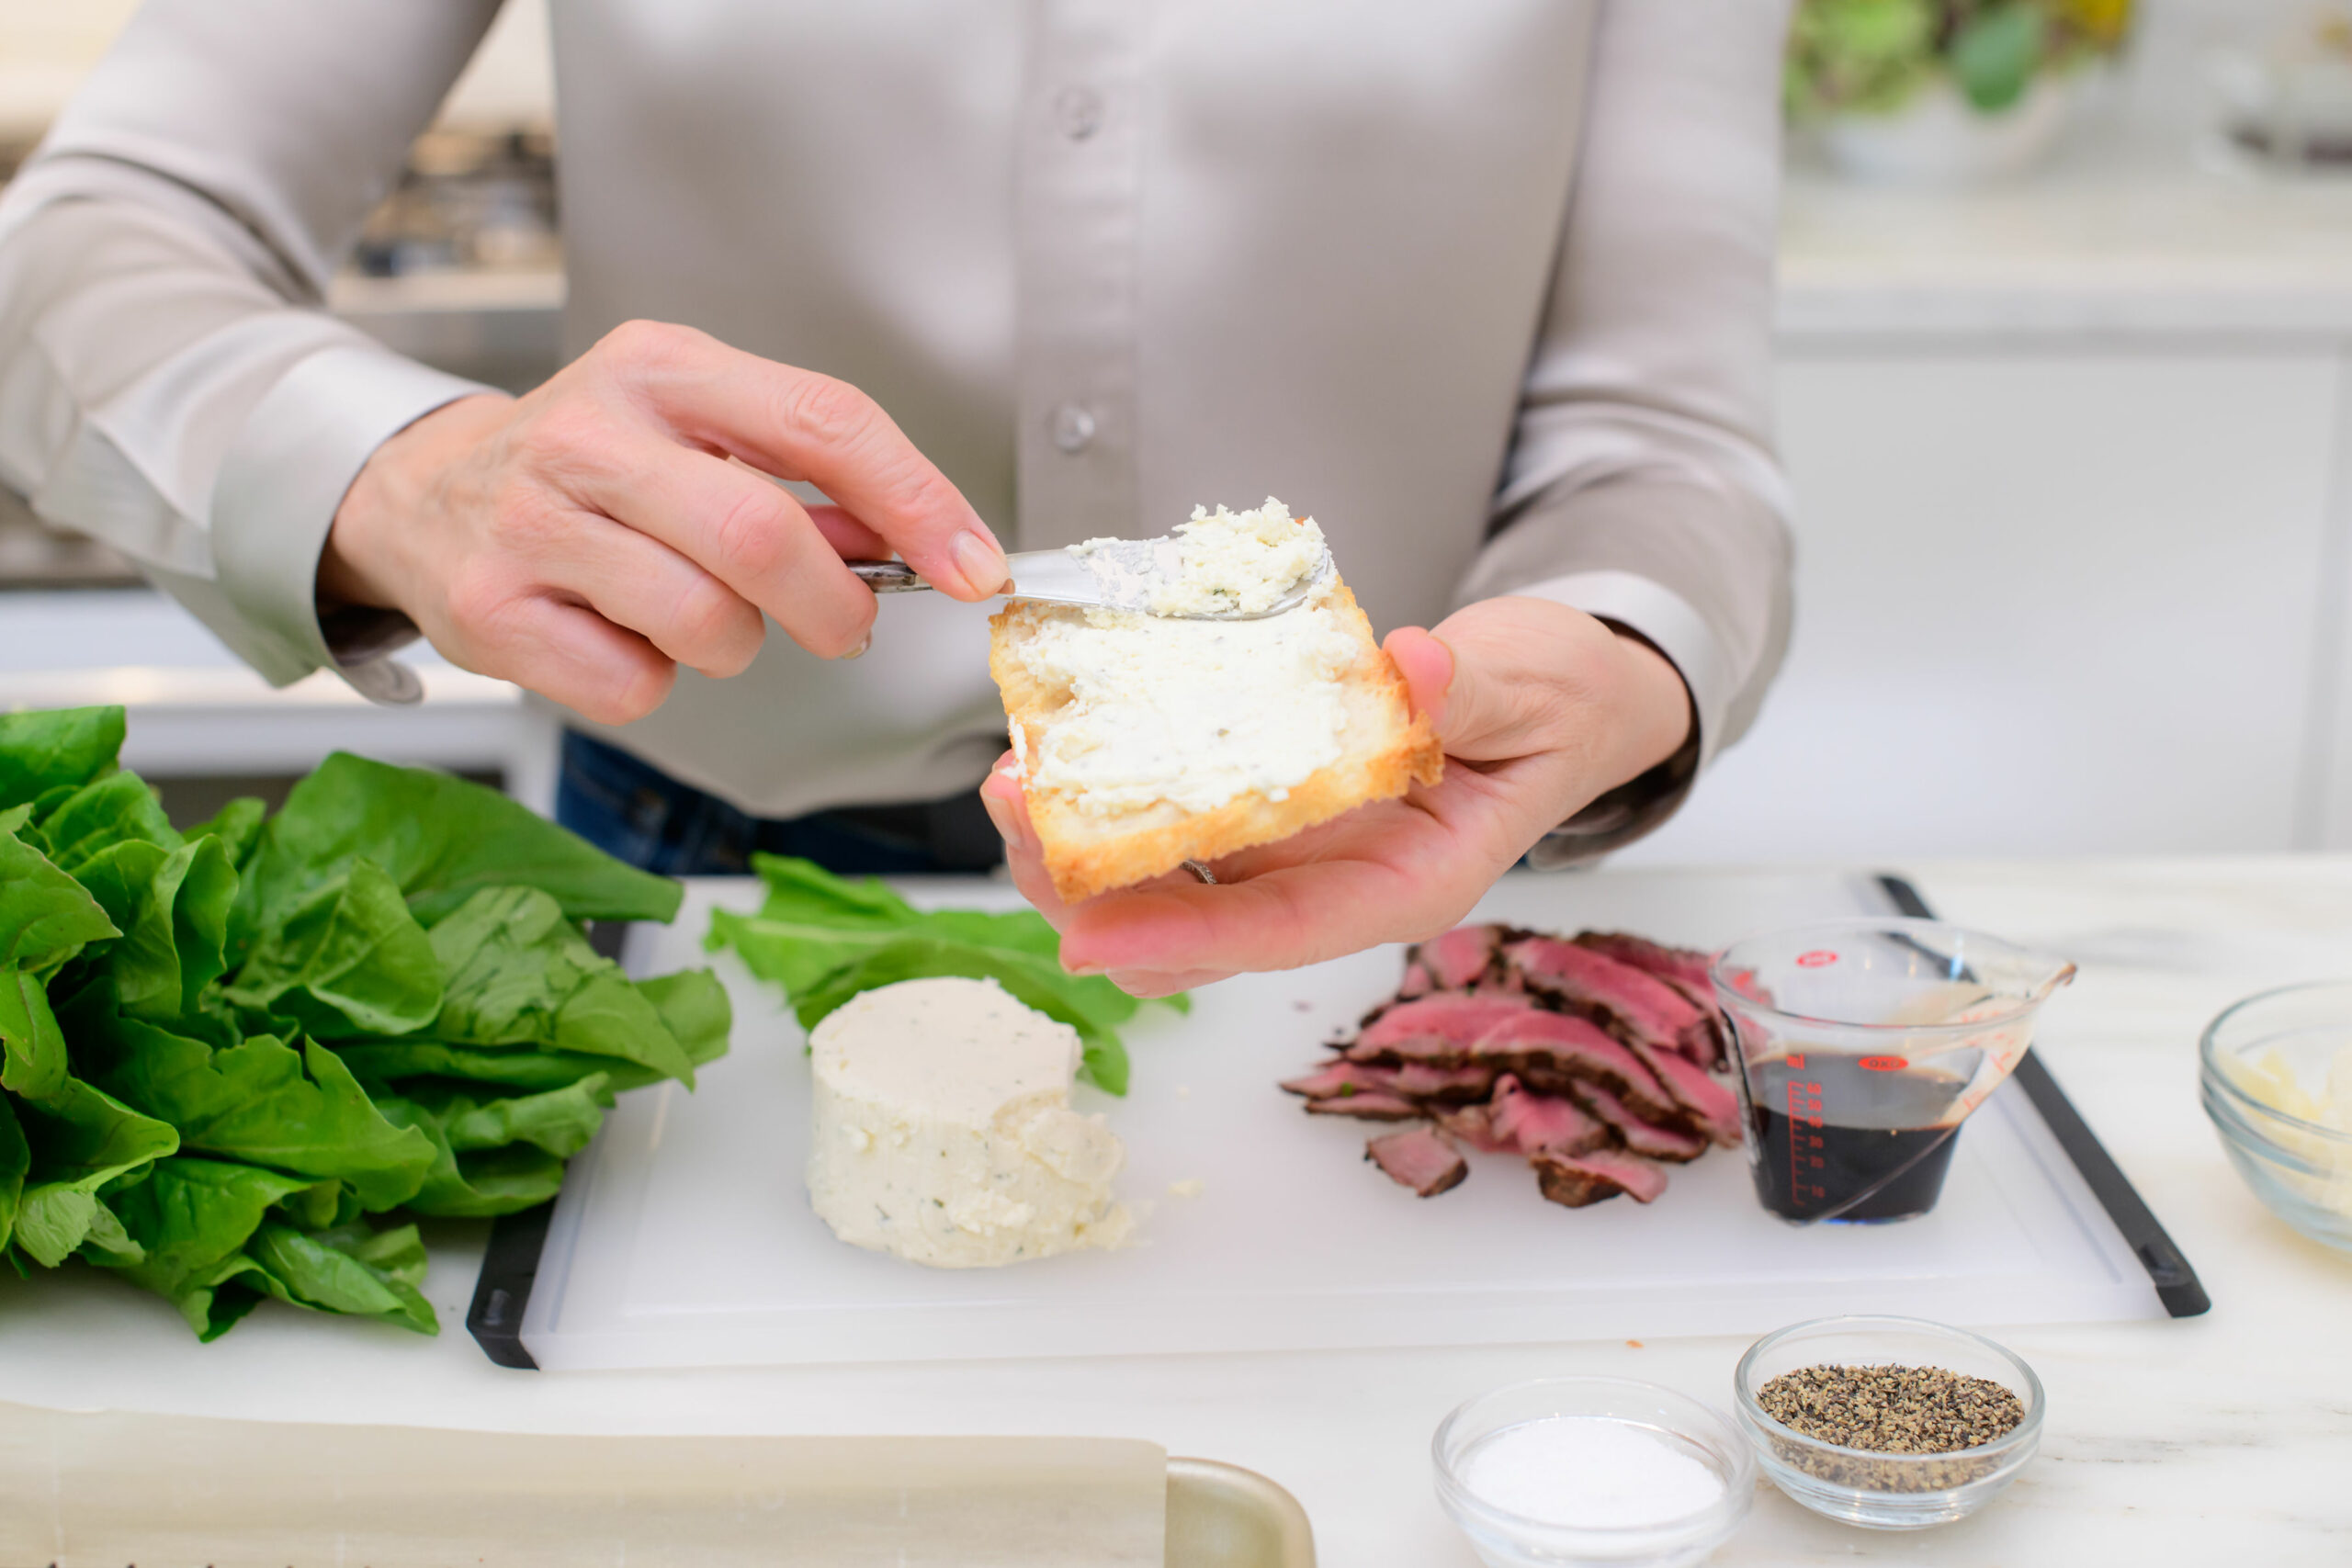 Making Beef Crostini with Parmesan and Balsamic Drizzle #recipe #beefcrostini #balsamicdrizzle #freshparmesan #recipetesting #valentinesdaymeal